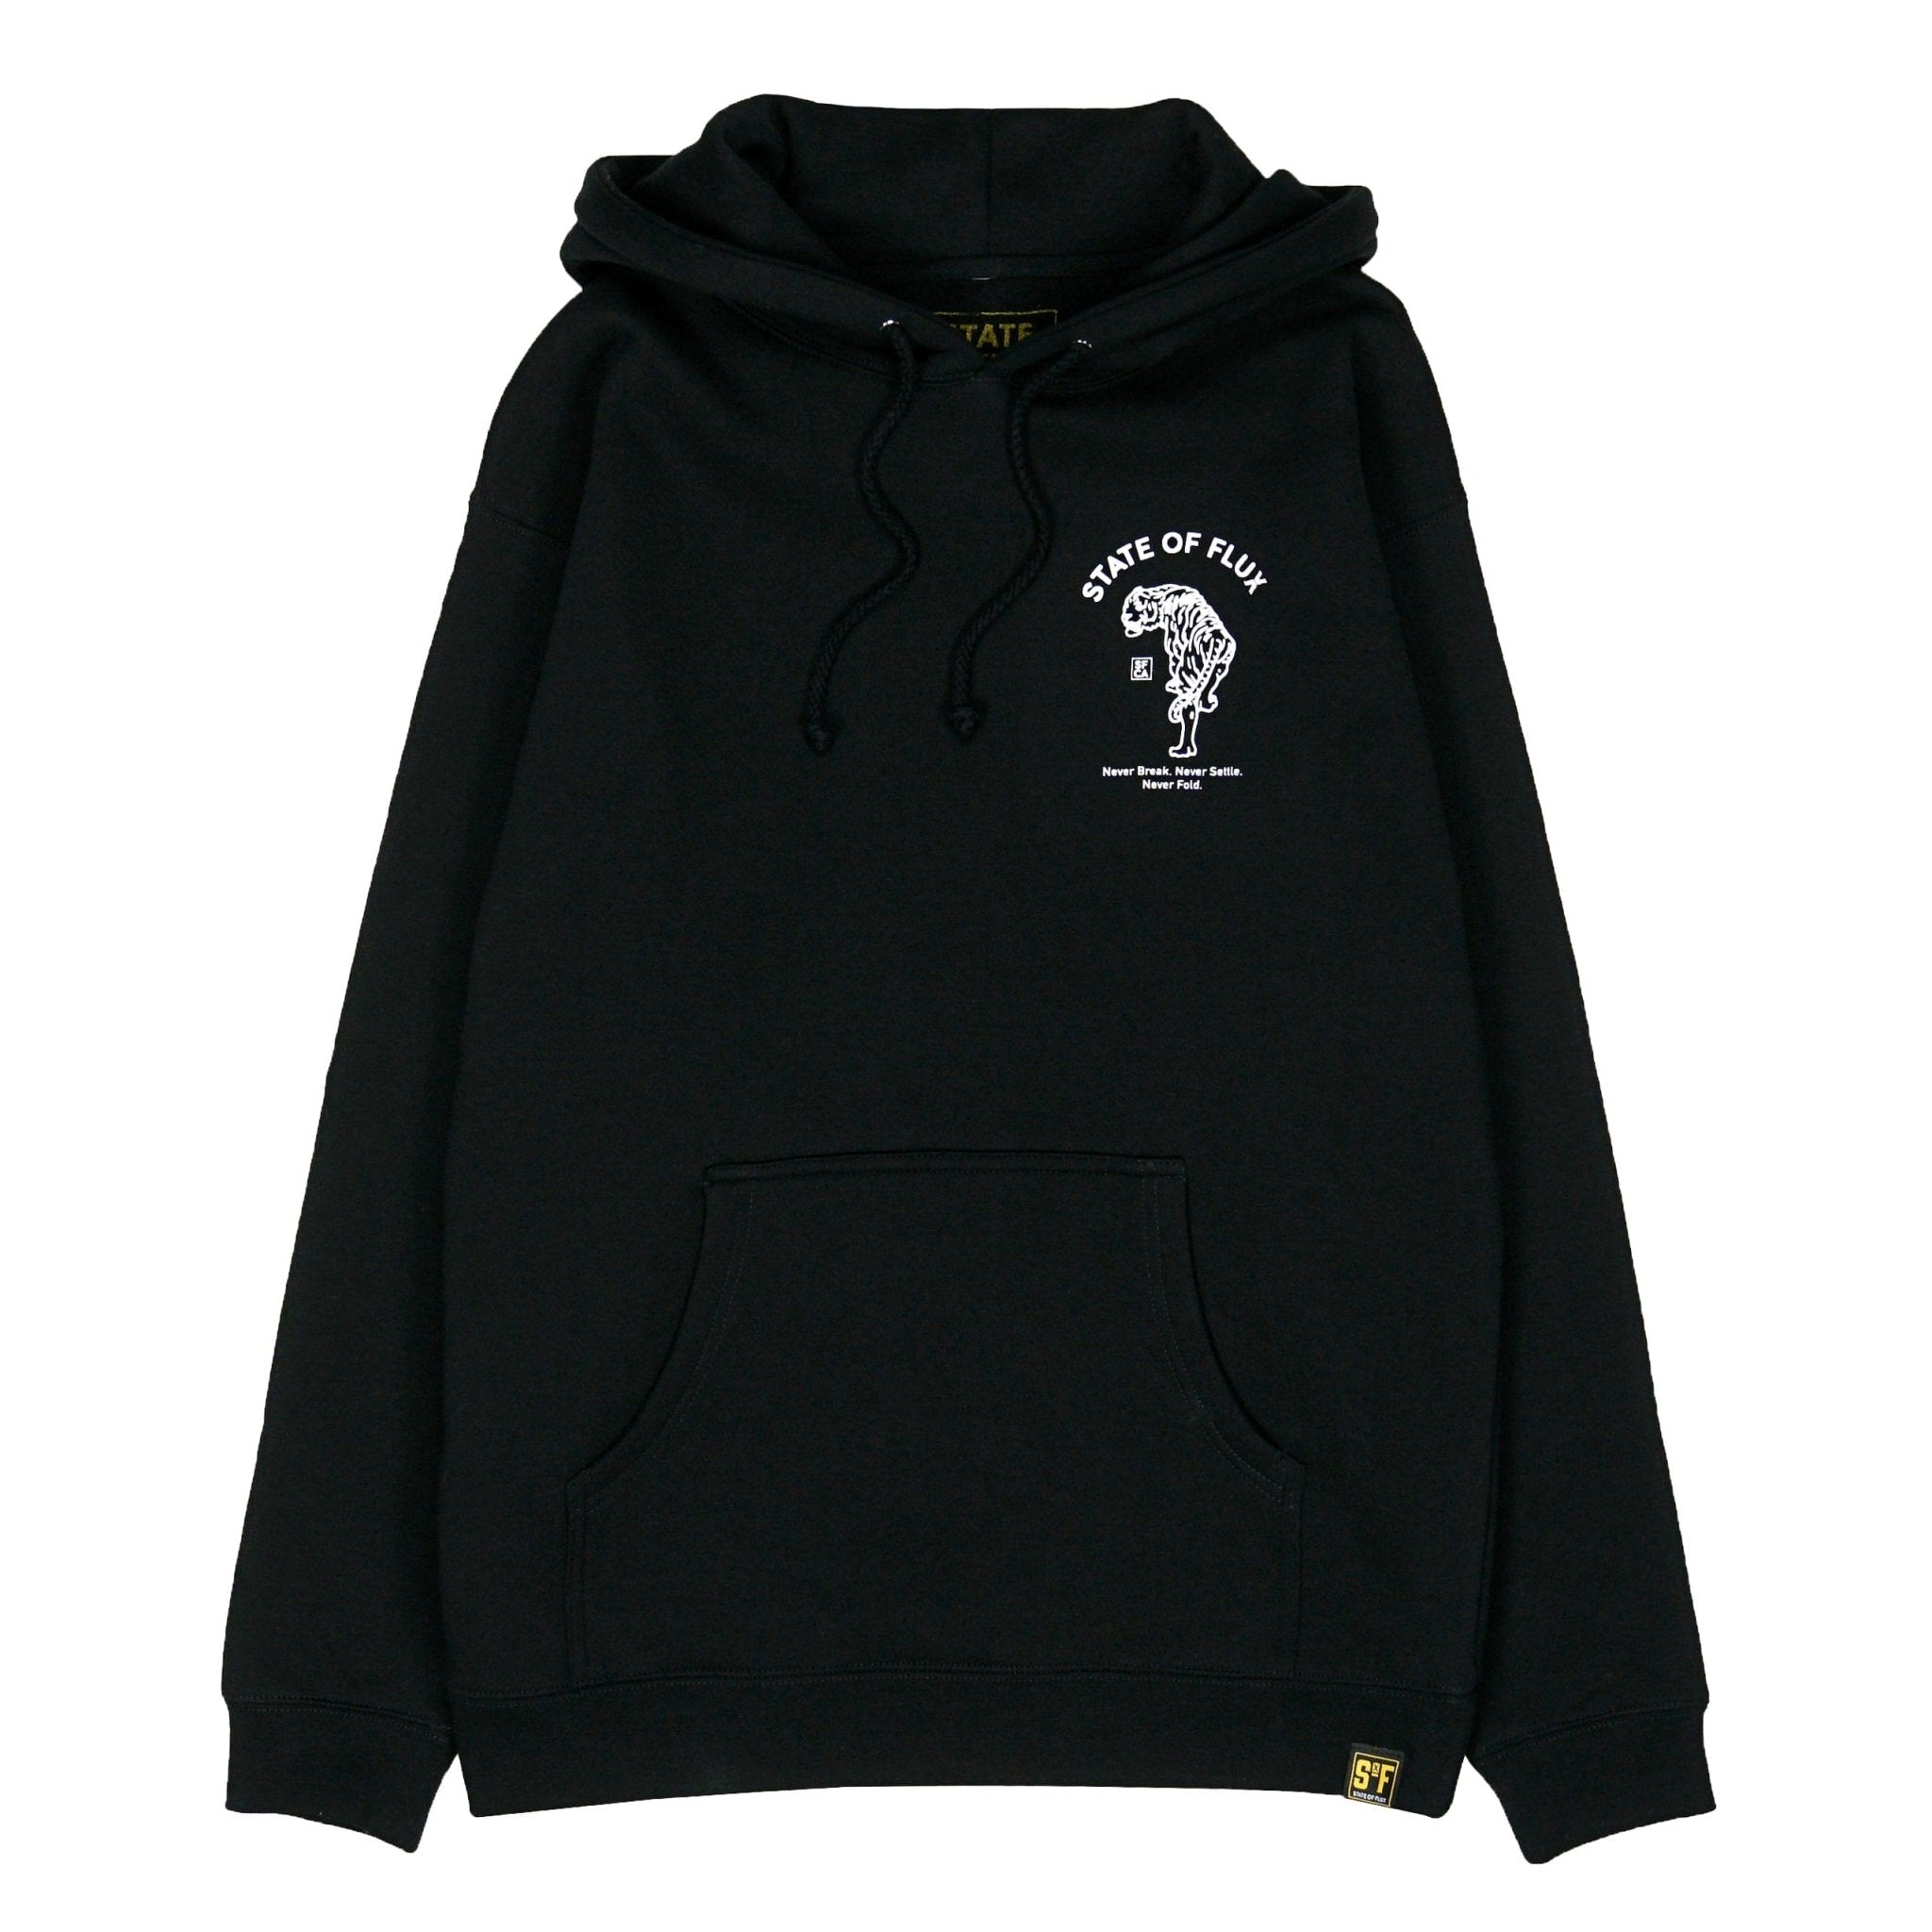 Prowler Hoodie in black and white